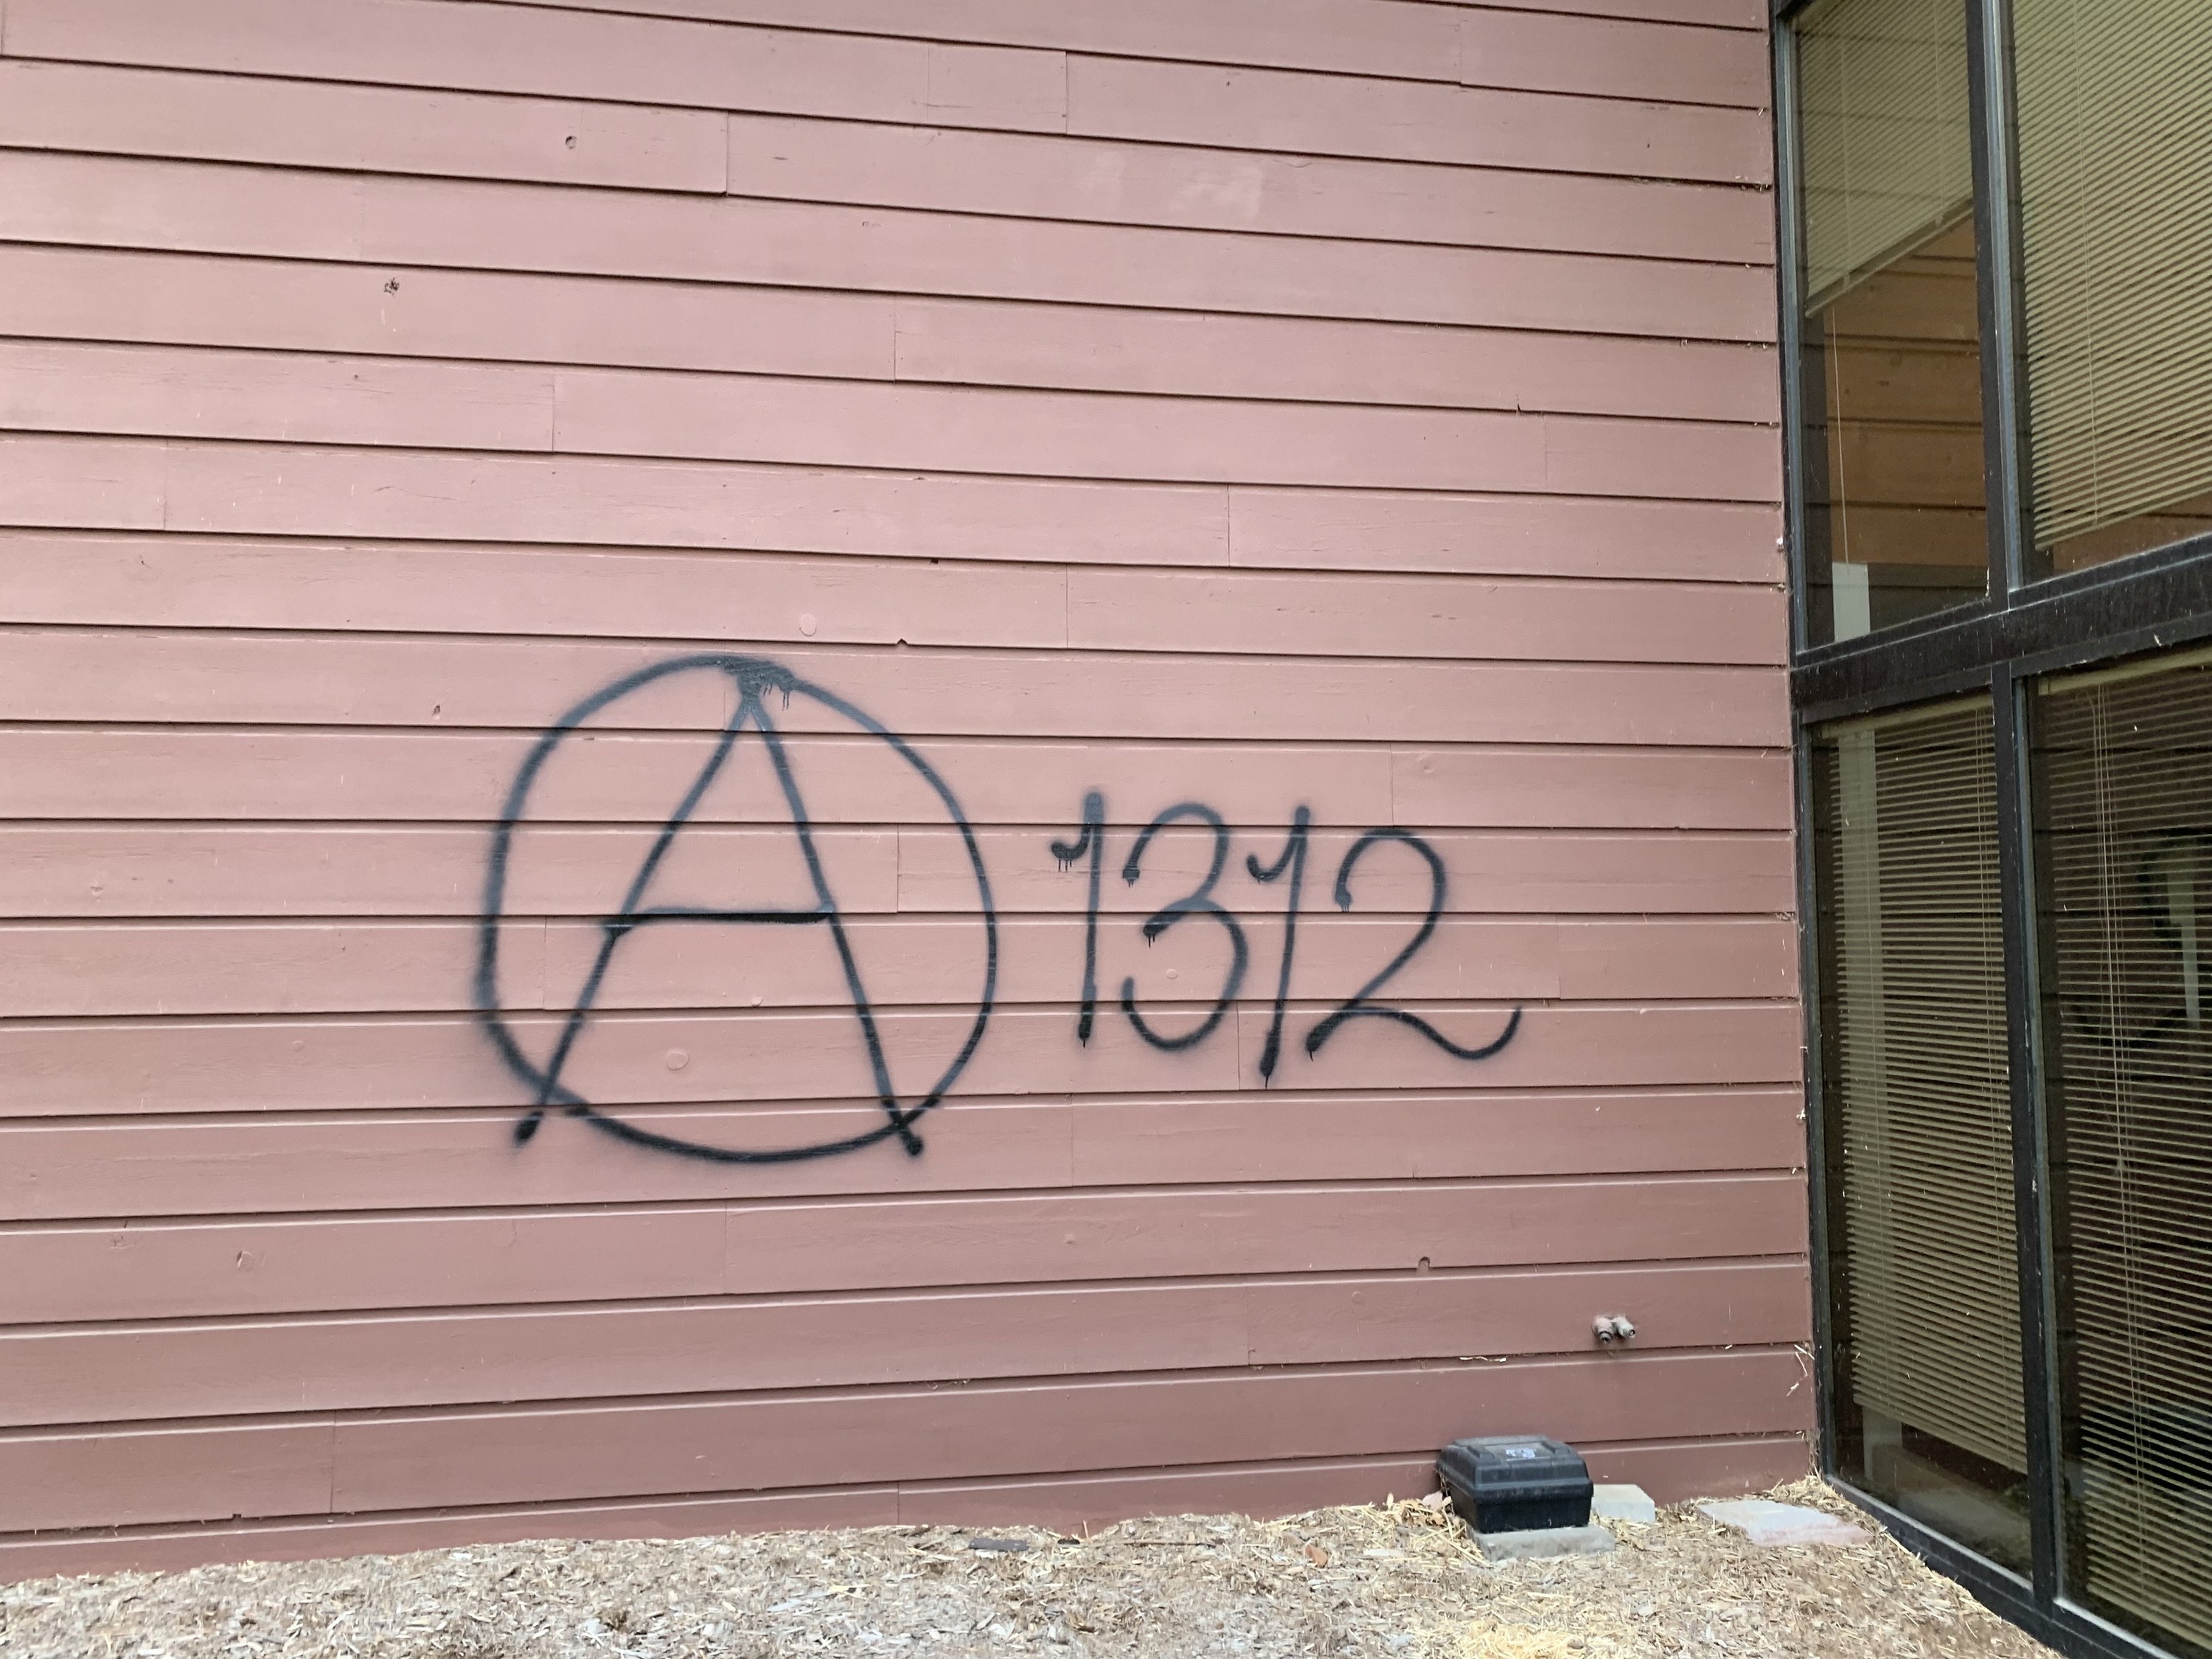 Graffiti on an exterior walls shows the letter A in a circle, with the numbers 1 3 1 2